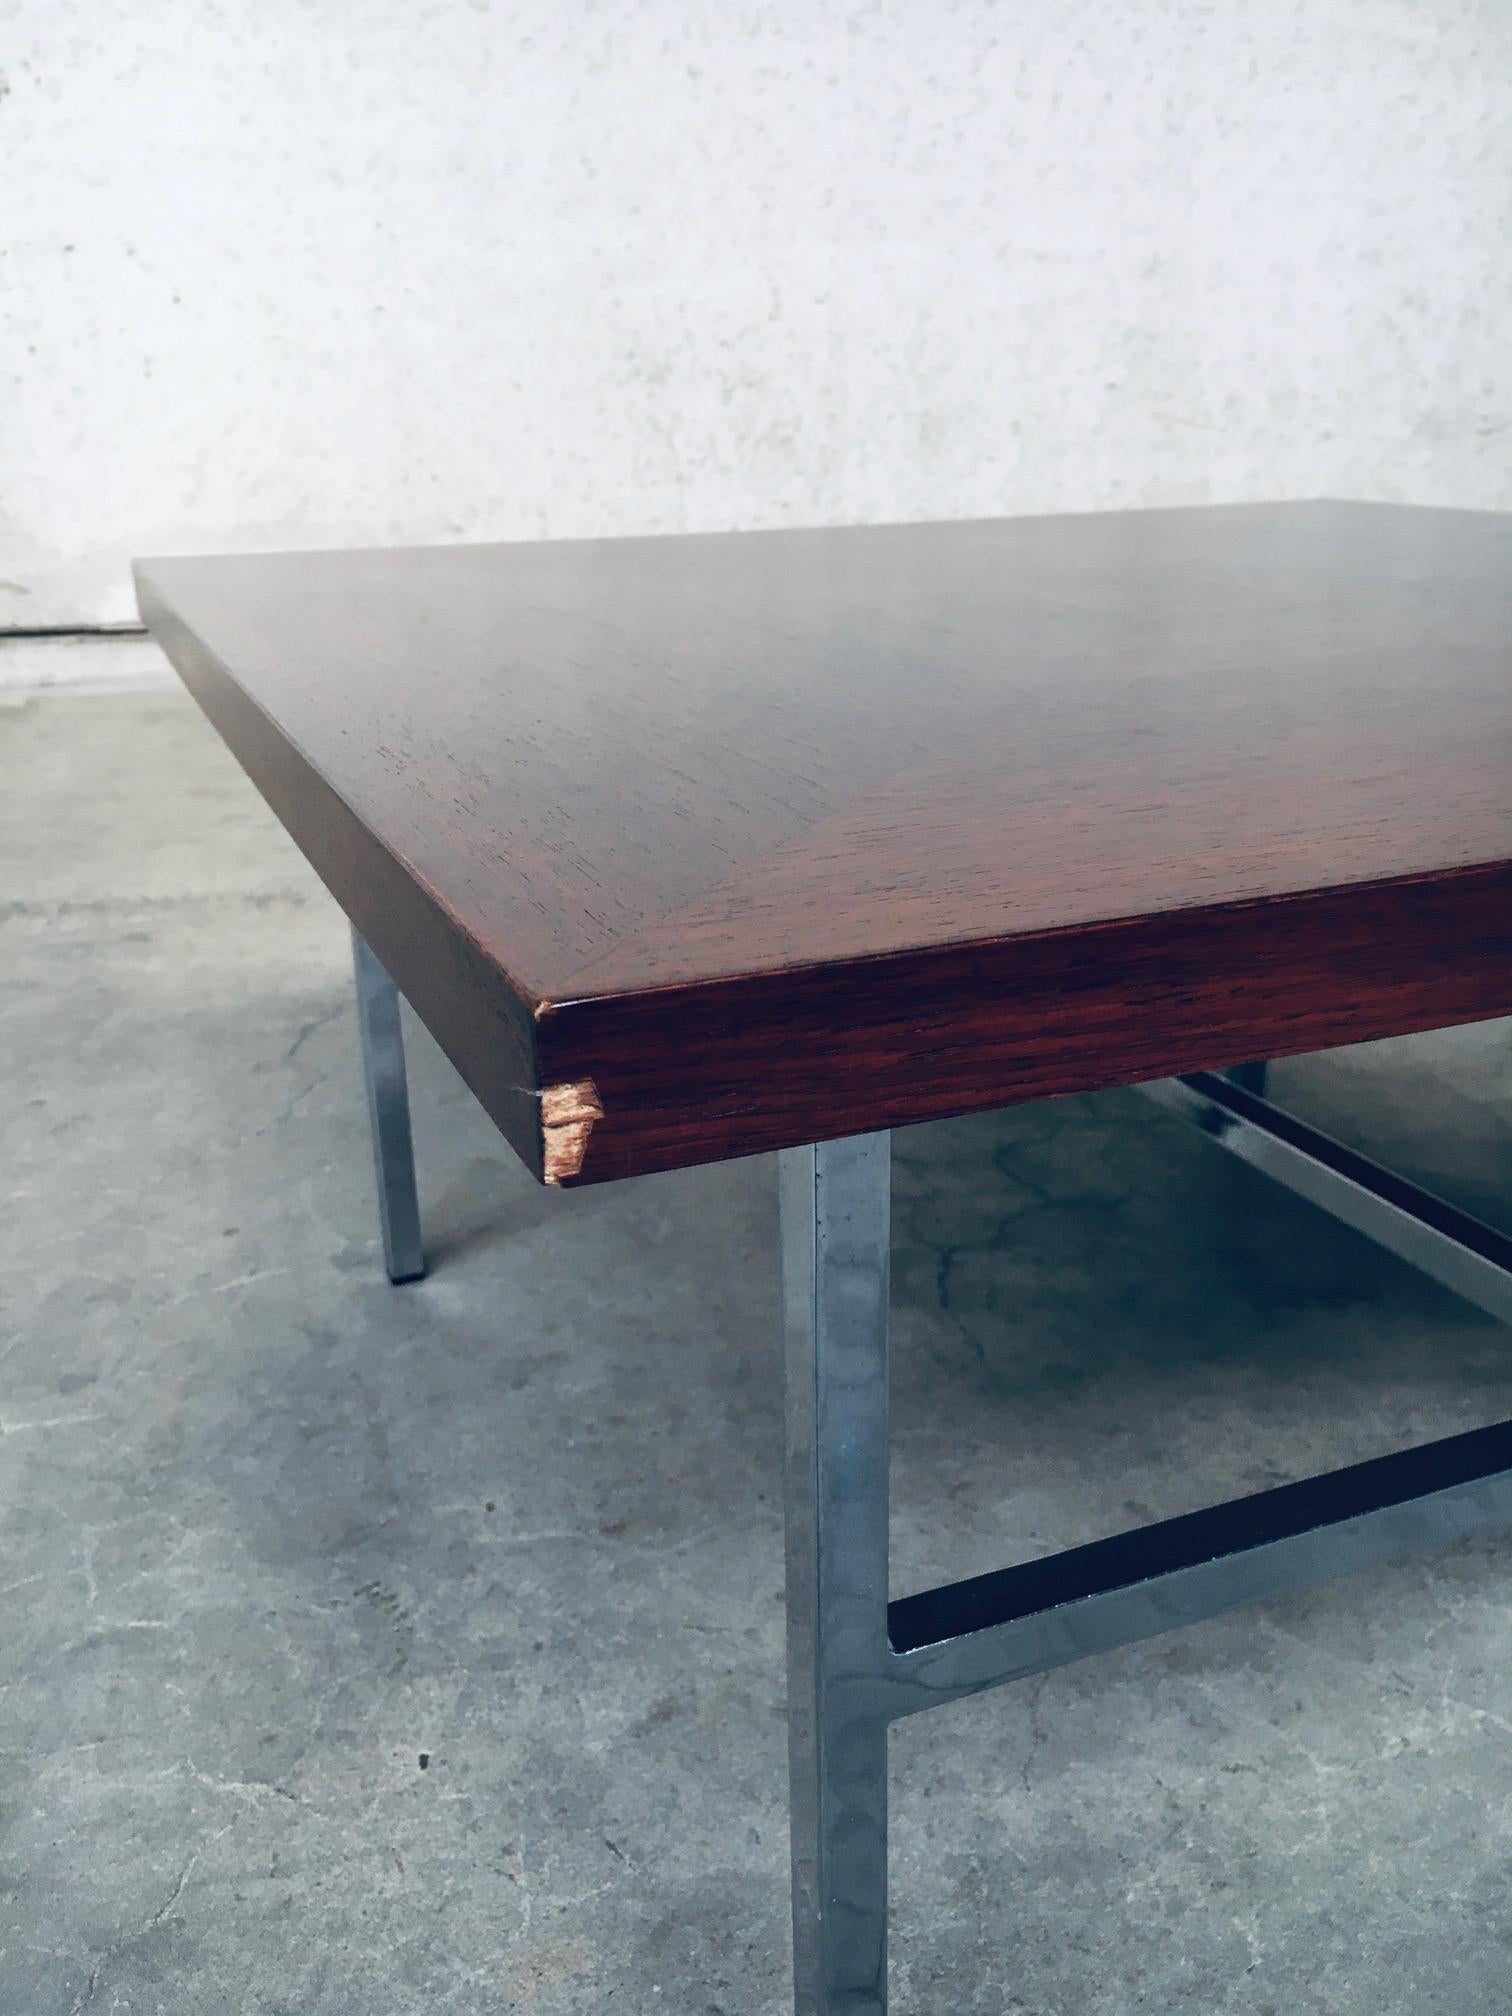 Midcentury Dutch Design Coffee Table, Netherlands 1960's For Sale 8